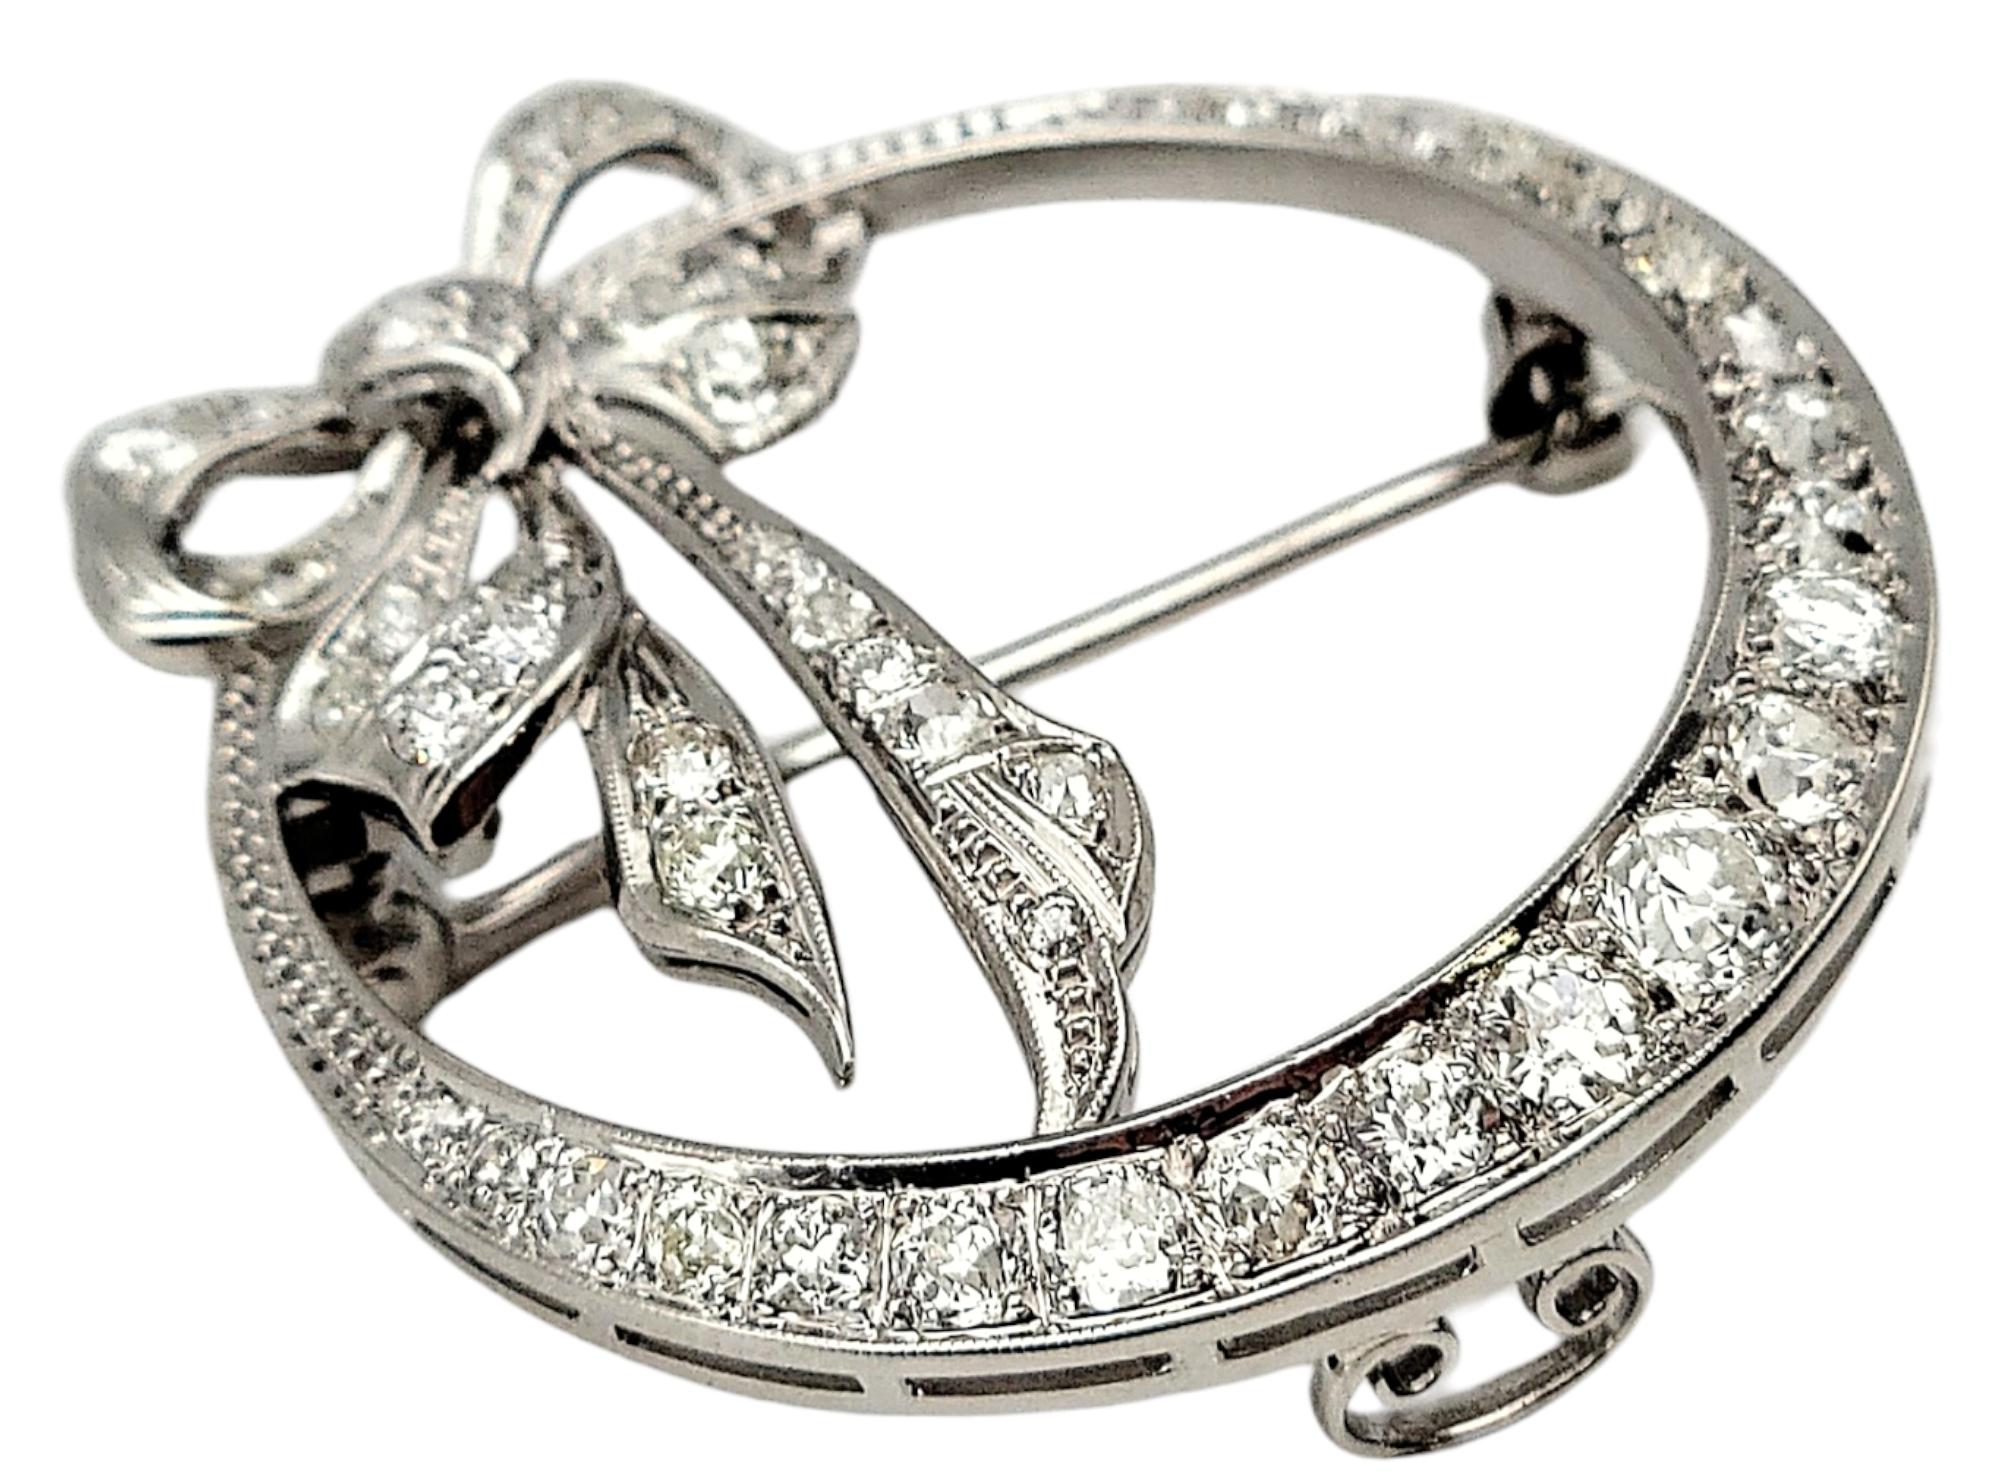 This stunning lady's brooch is the absolute perfect addition to your wardrobe. The sparkling diamonds will enhance anything it is paired with, while the classic design will remain a timeless jewelry staple.

This gorgeous brooch is an open circle of